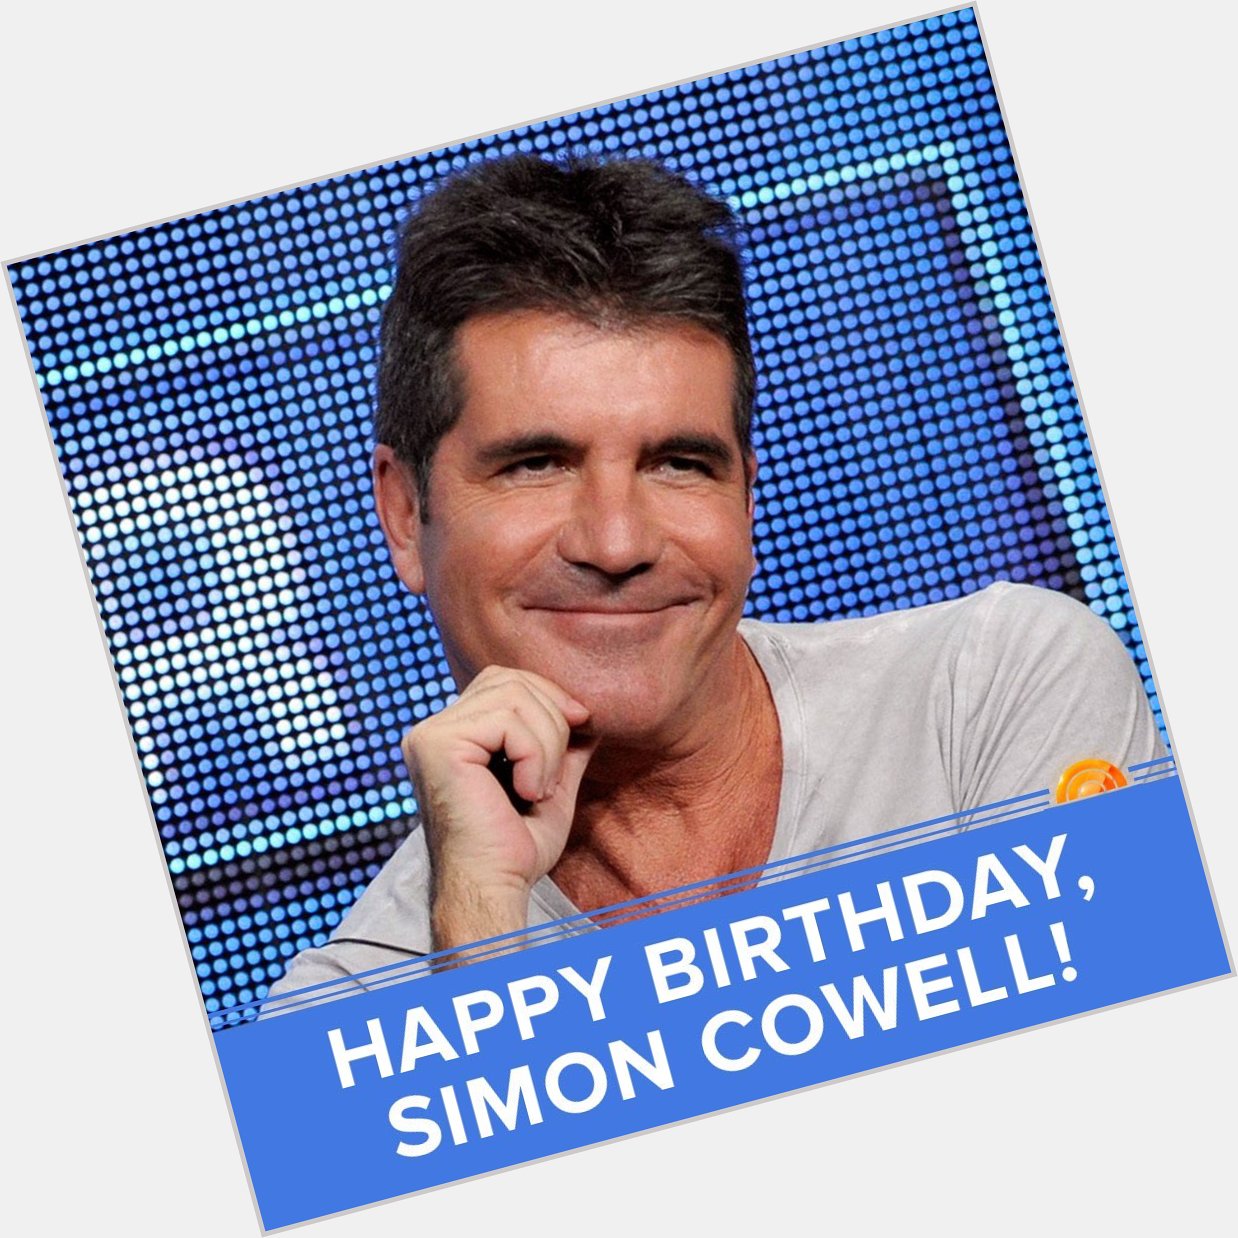 HAPPY BIRTHDAY SIMON FROM ALL OF US AT SIMON COWELL FANS             